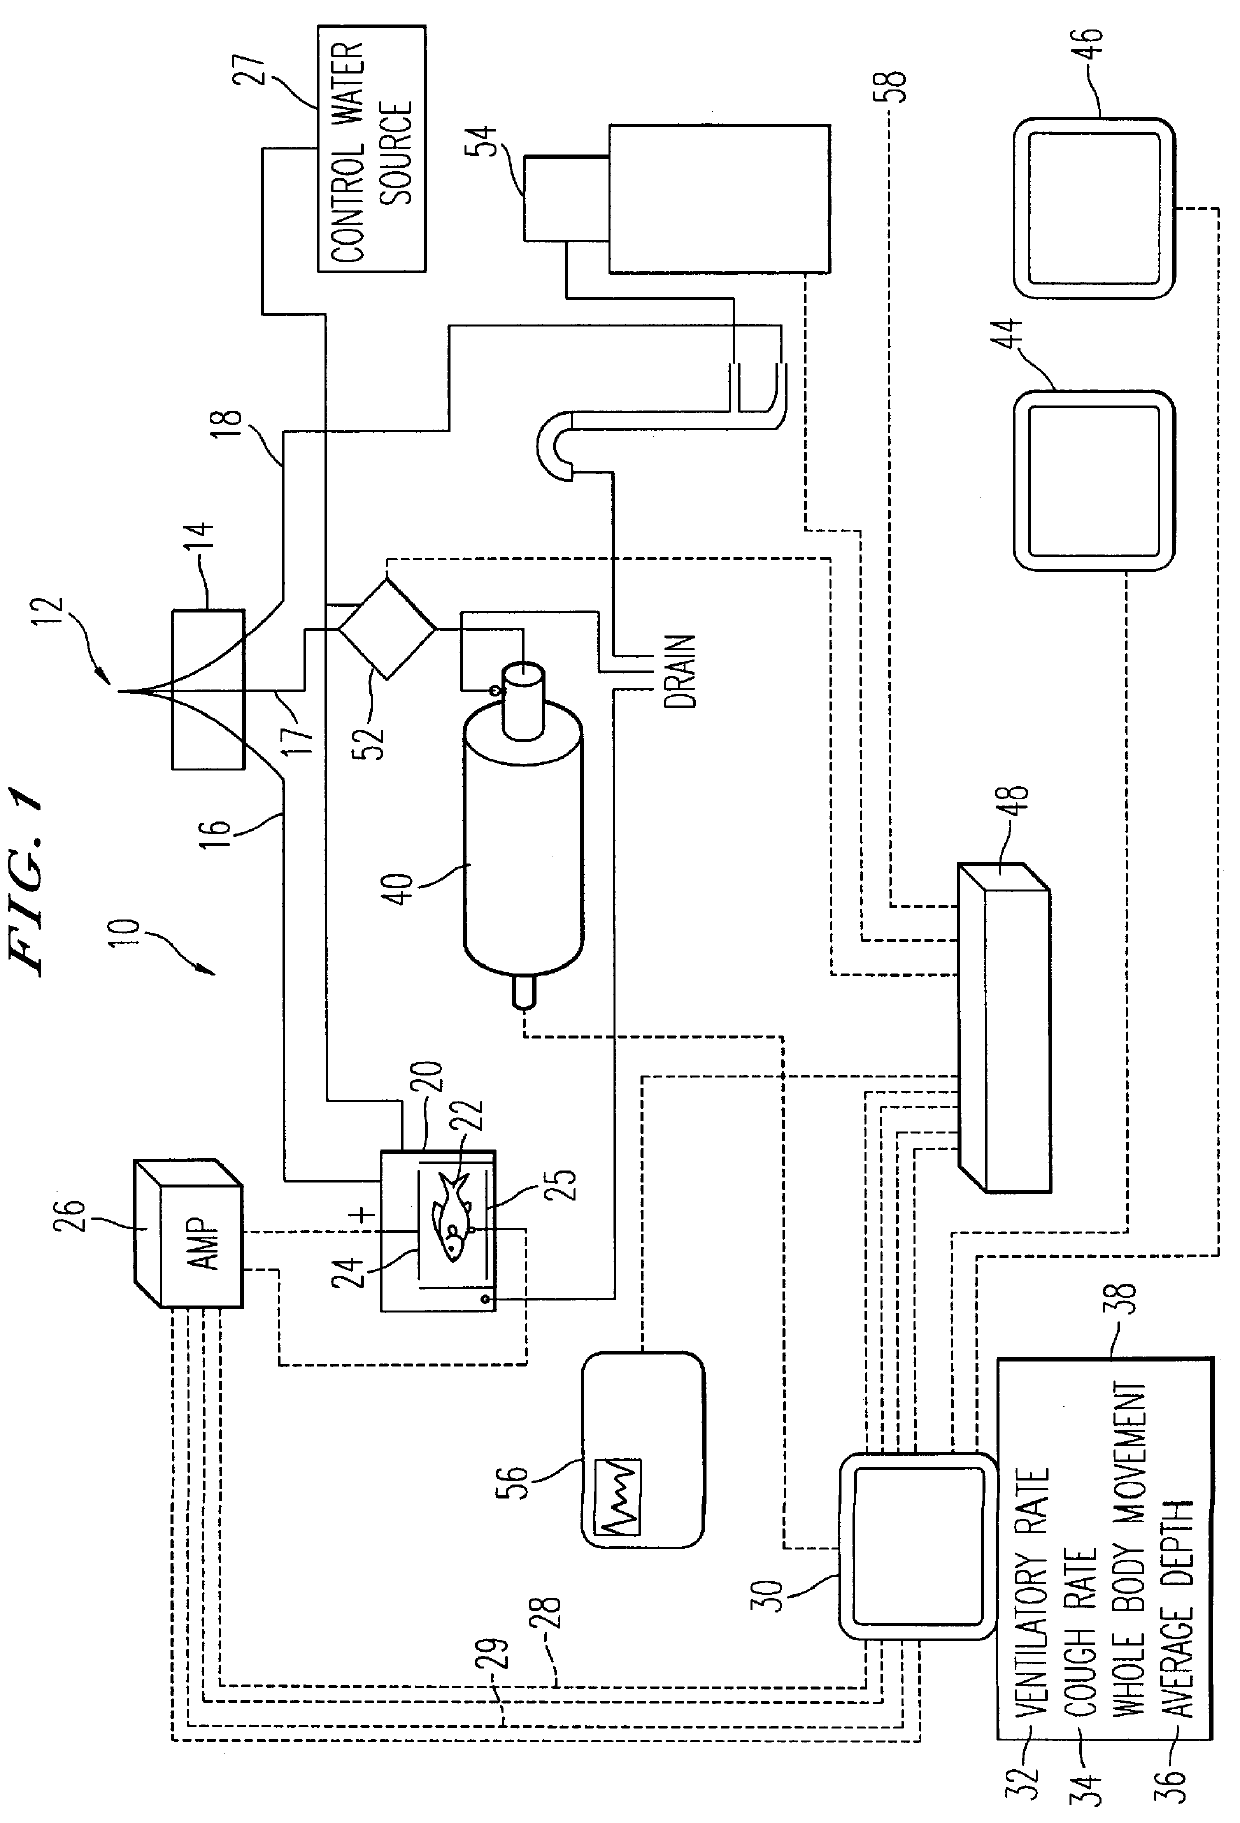 Apparatus and method for automated biomonitoring of water quality